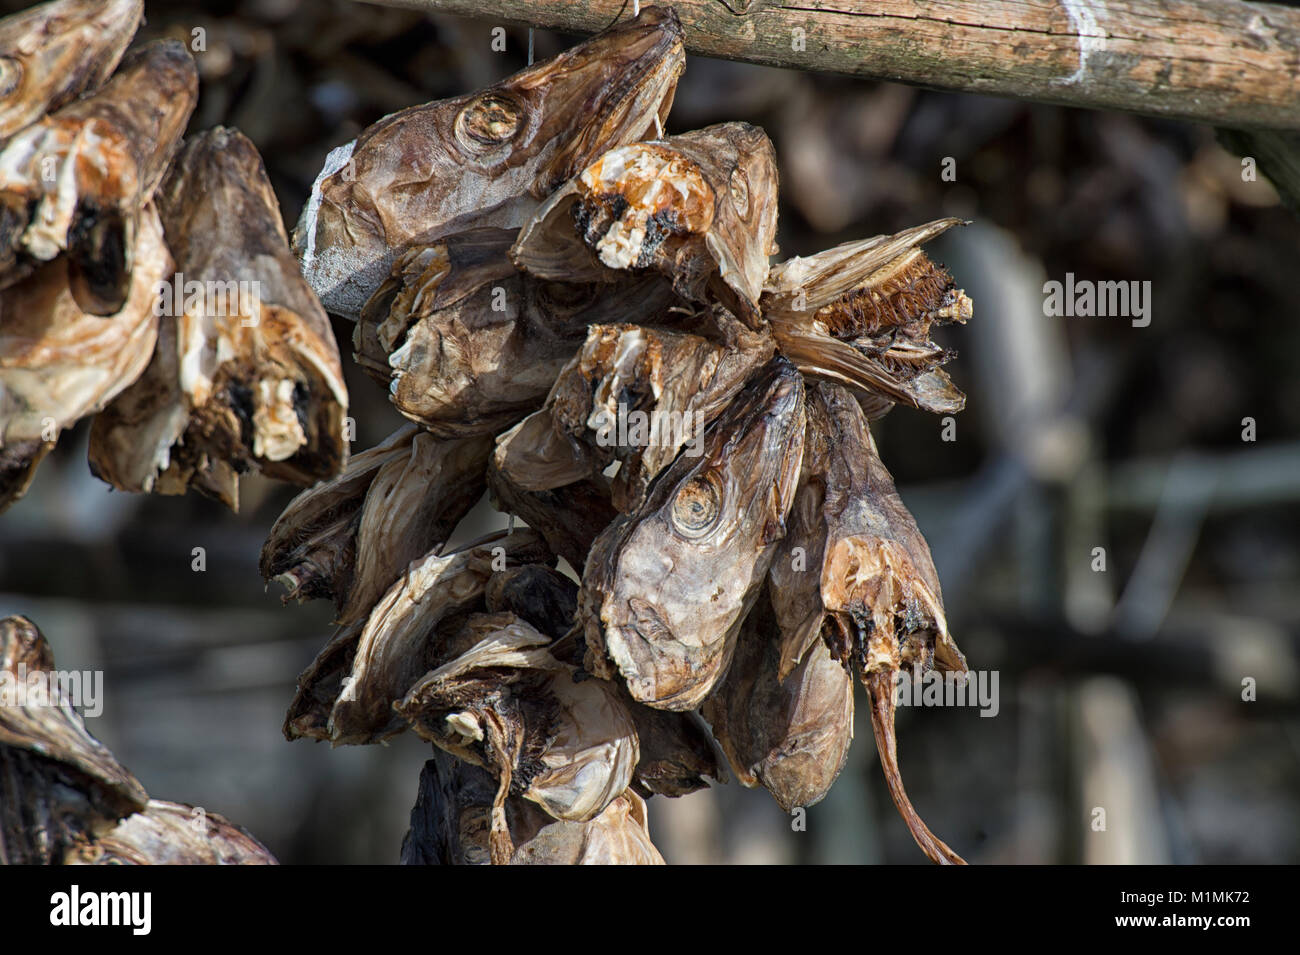 Dried fish heads hanging in the sun, Norway Stock Photo